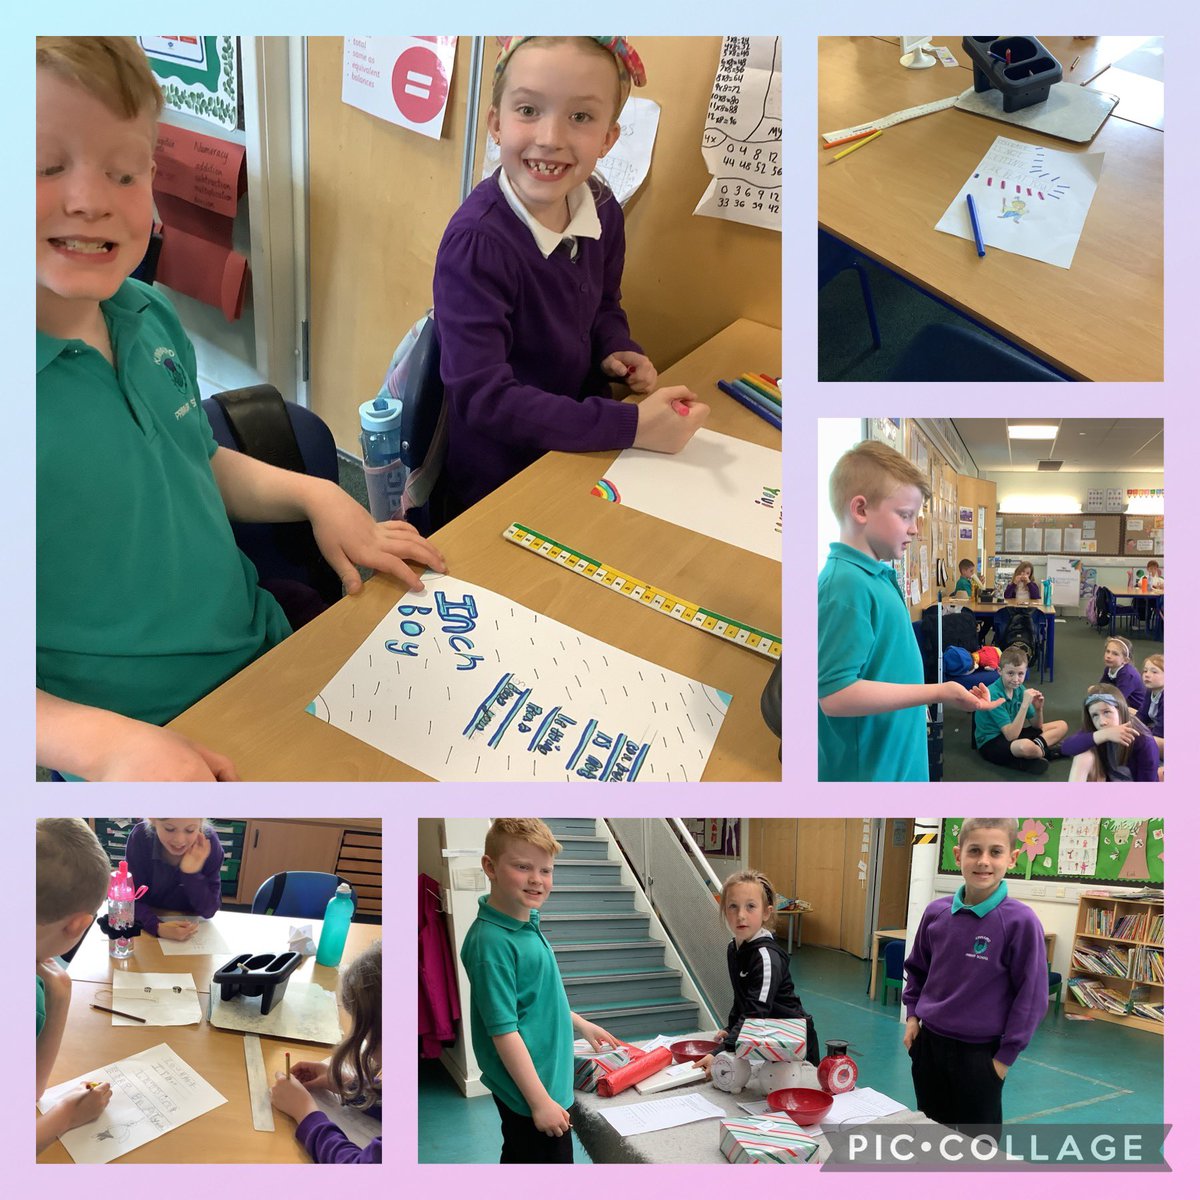 P4R had a busy day with new spelling words, handwriting, looking at powerful persuasive language, book swap, Measuring weight and investigating ways when we find courage. Phew! 😀👏🏻